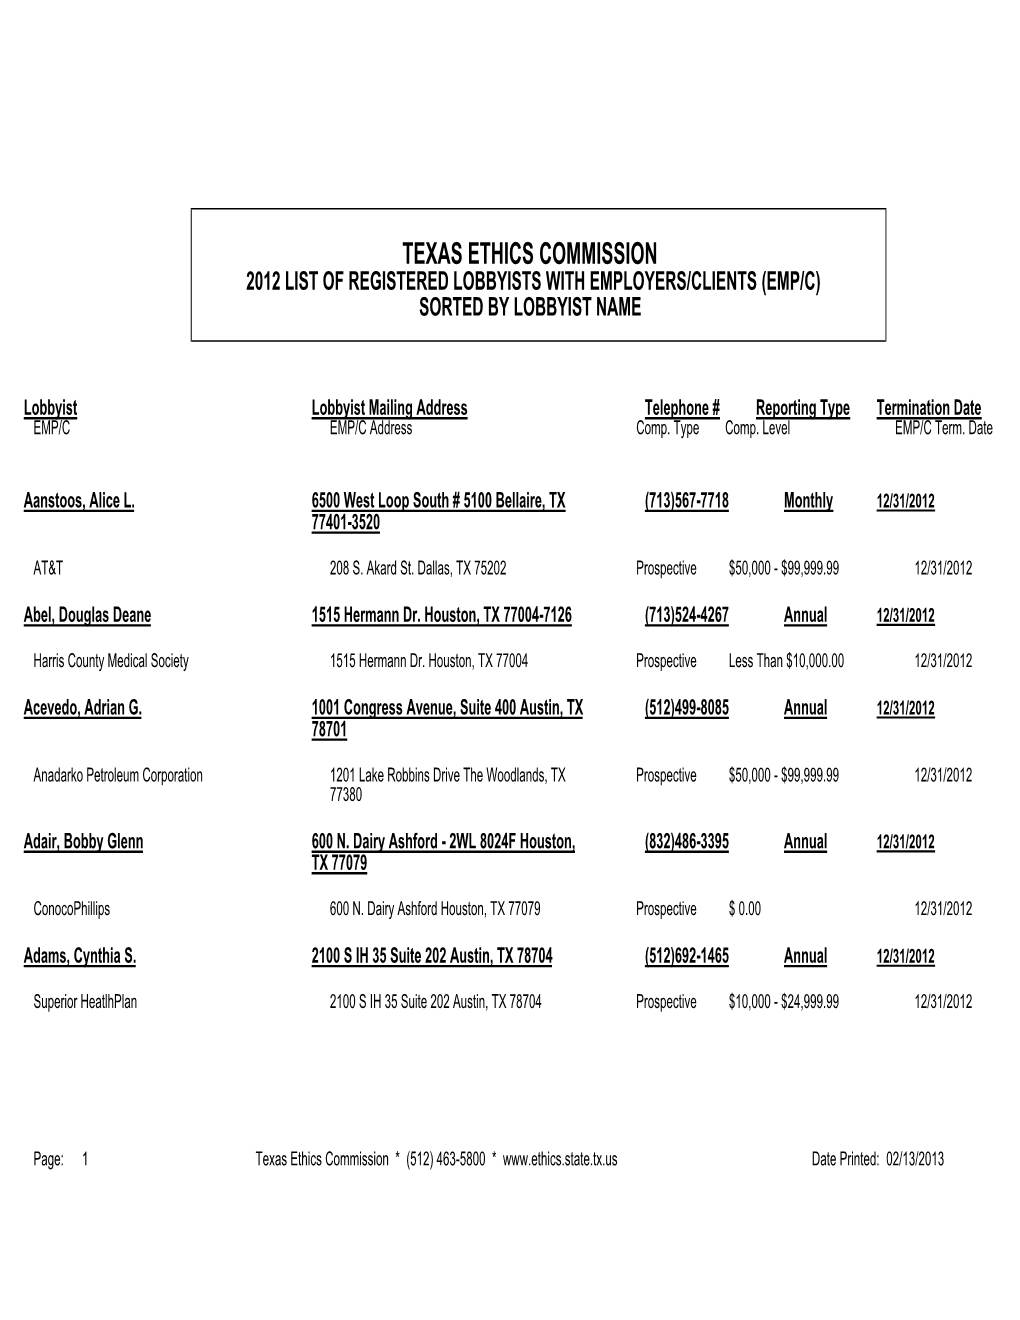 Texas Ethics Commission 2012 List of Registered Lobbyists with Employers/Clients (Emp/C) Sorted by Lobbyist Name